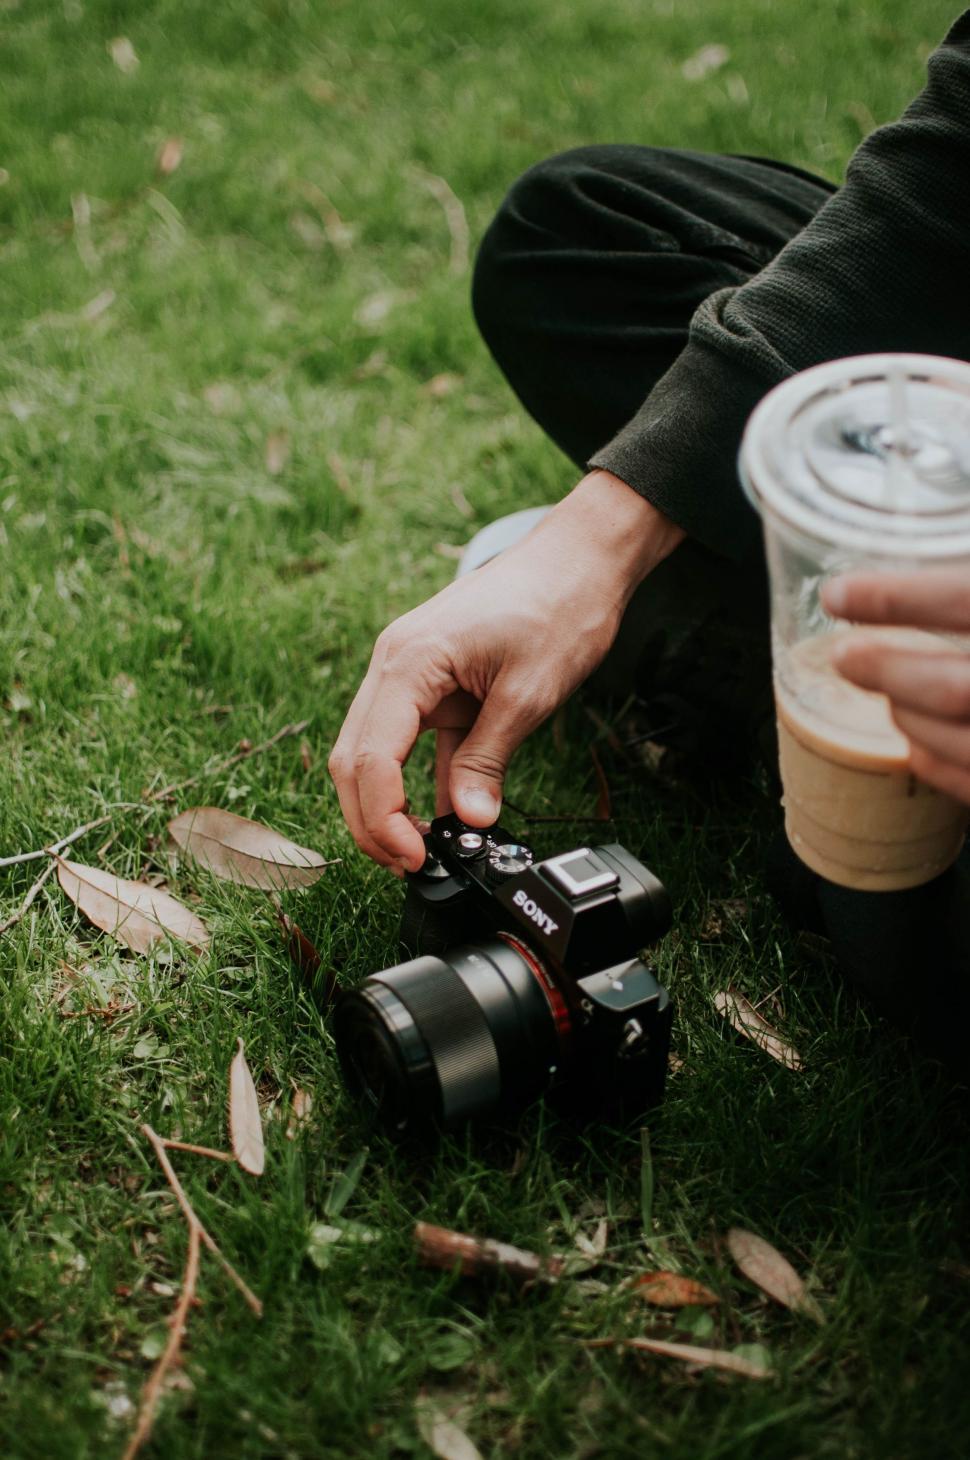 Free Image of Person Holding Camera and Cup of Coffee 